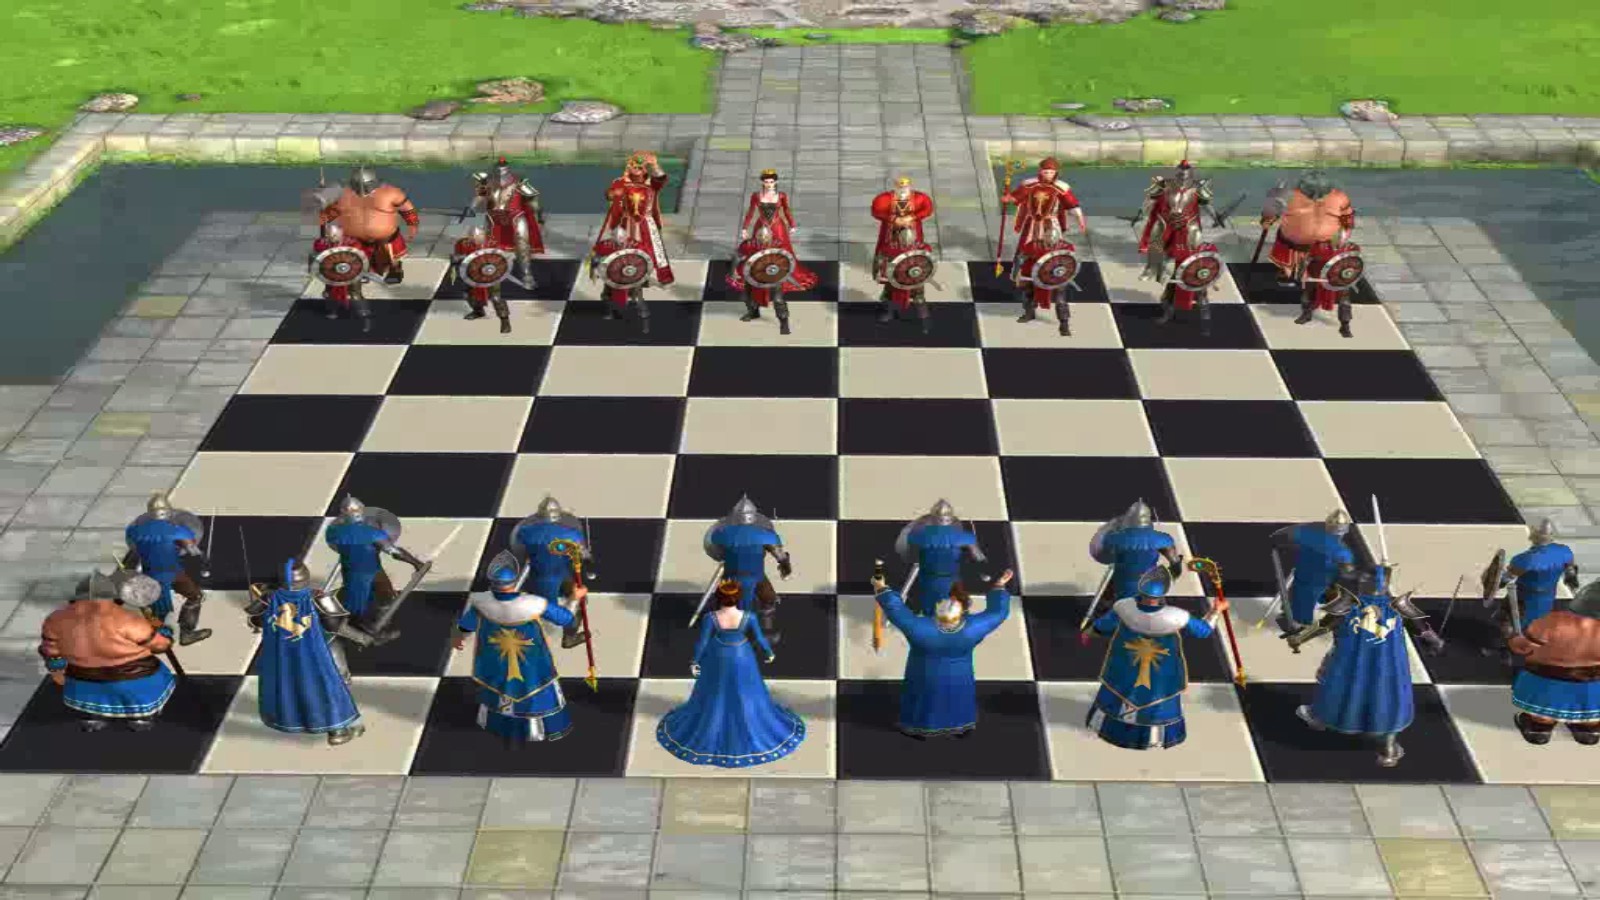 battle chess game oof kings shuts down